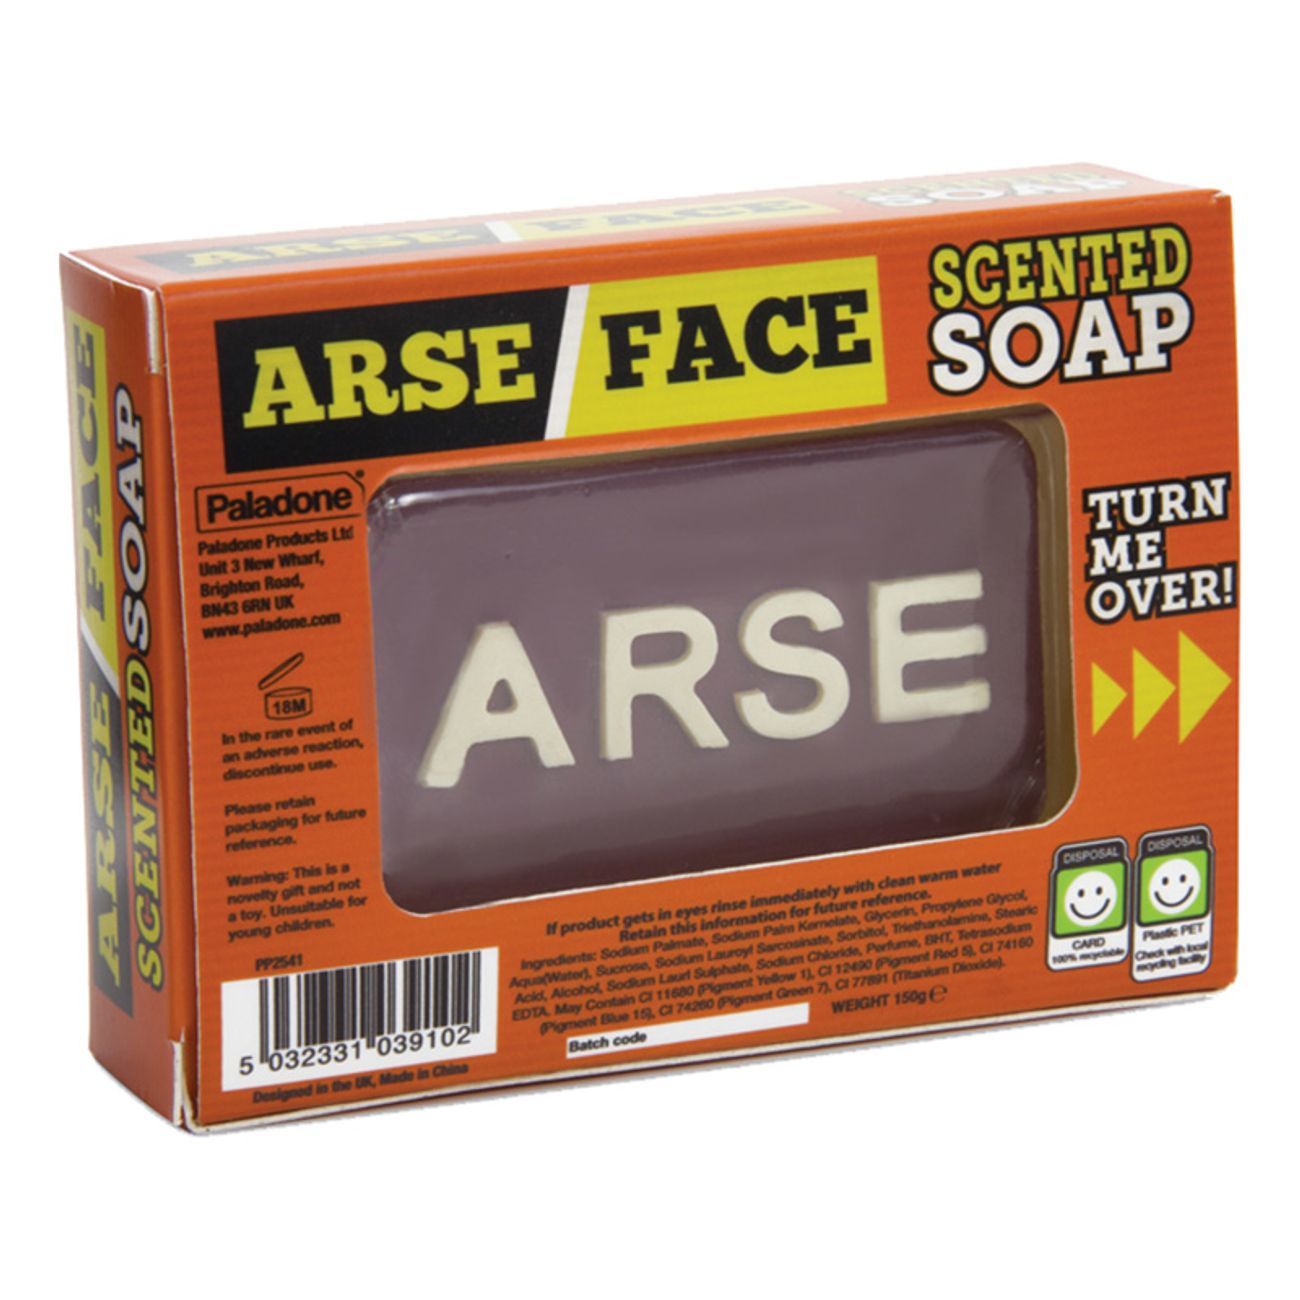 arseface-tval-1